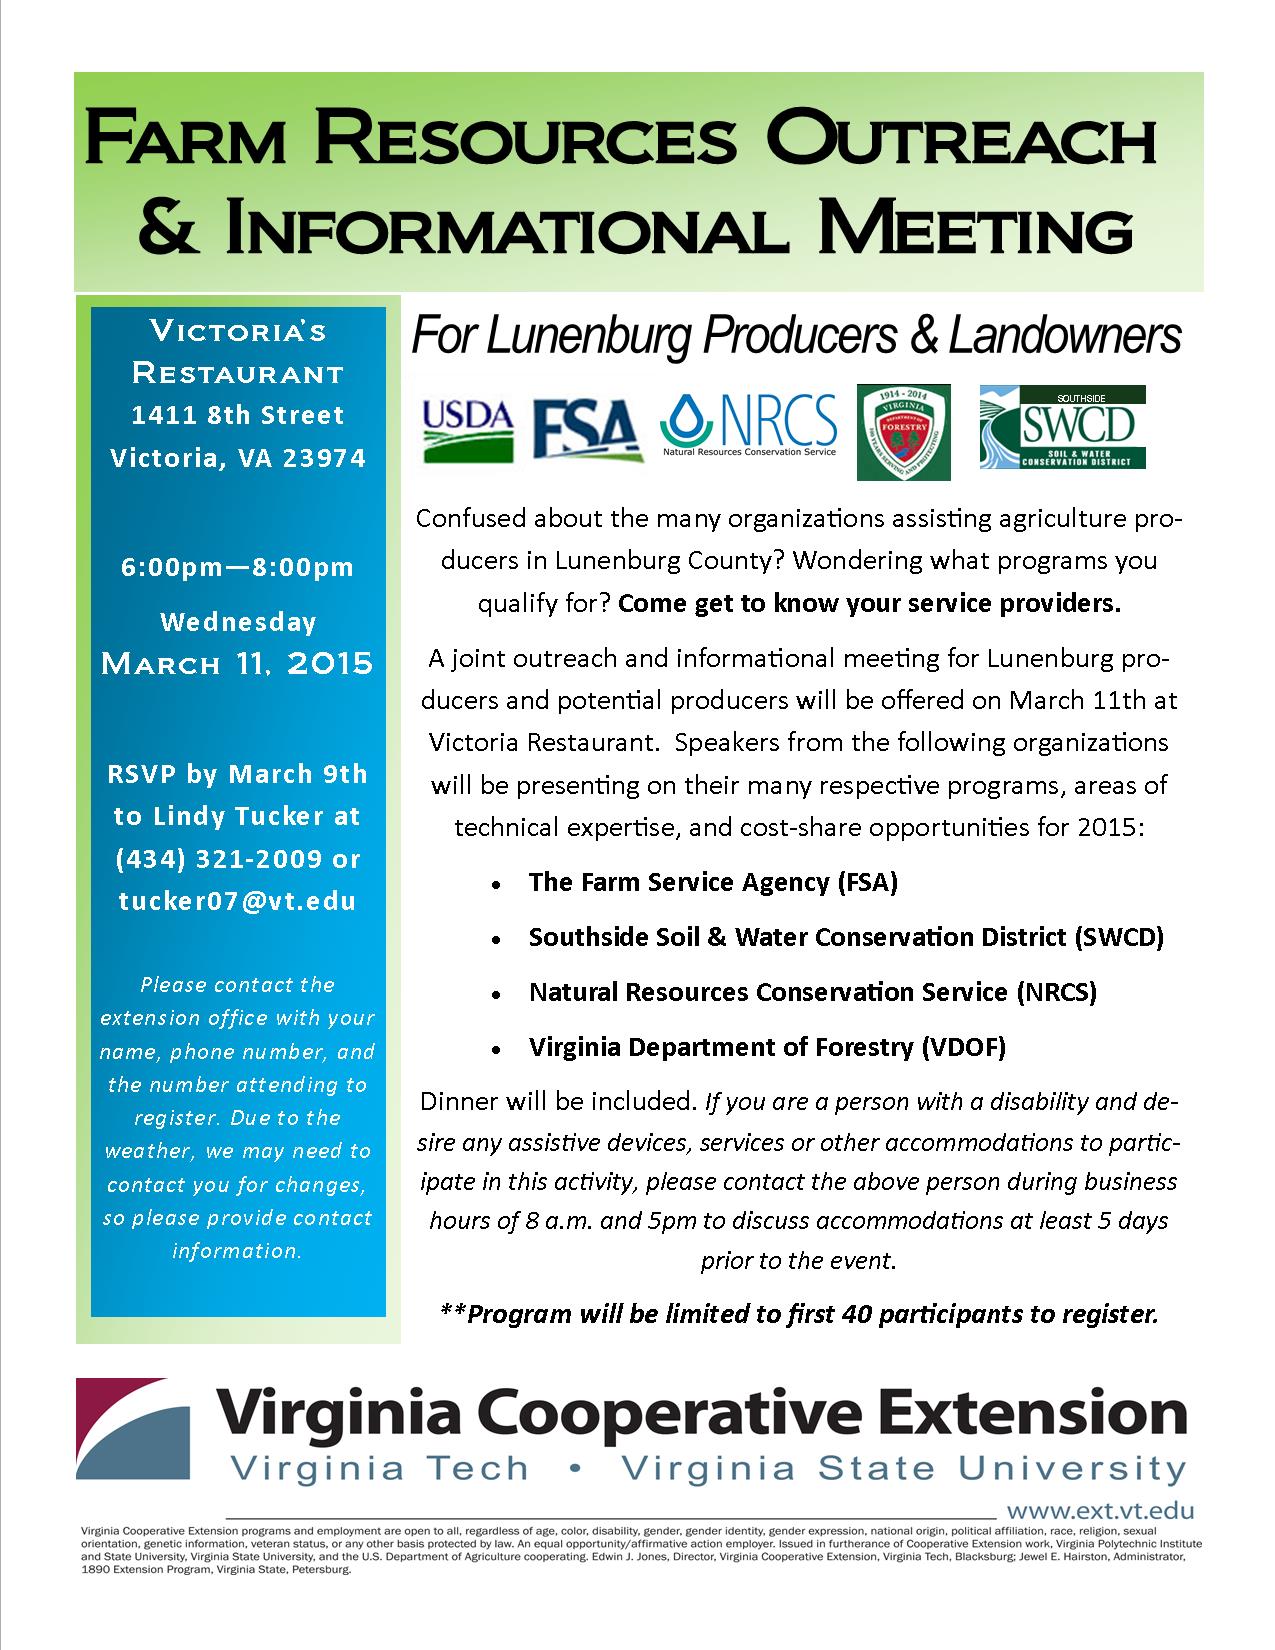 Farm Resources Outreach Meeting - March 11, 2015